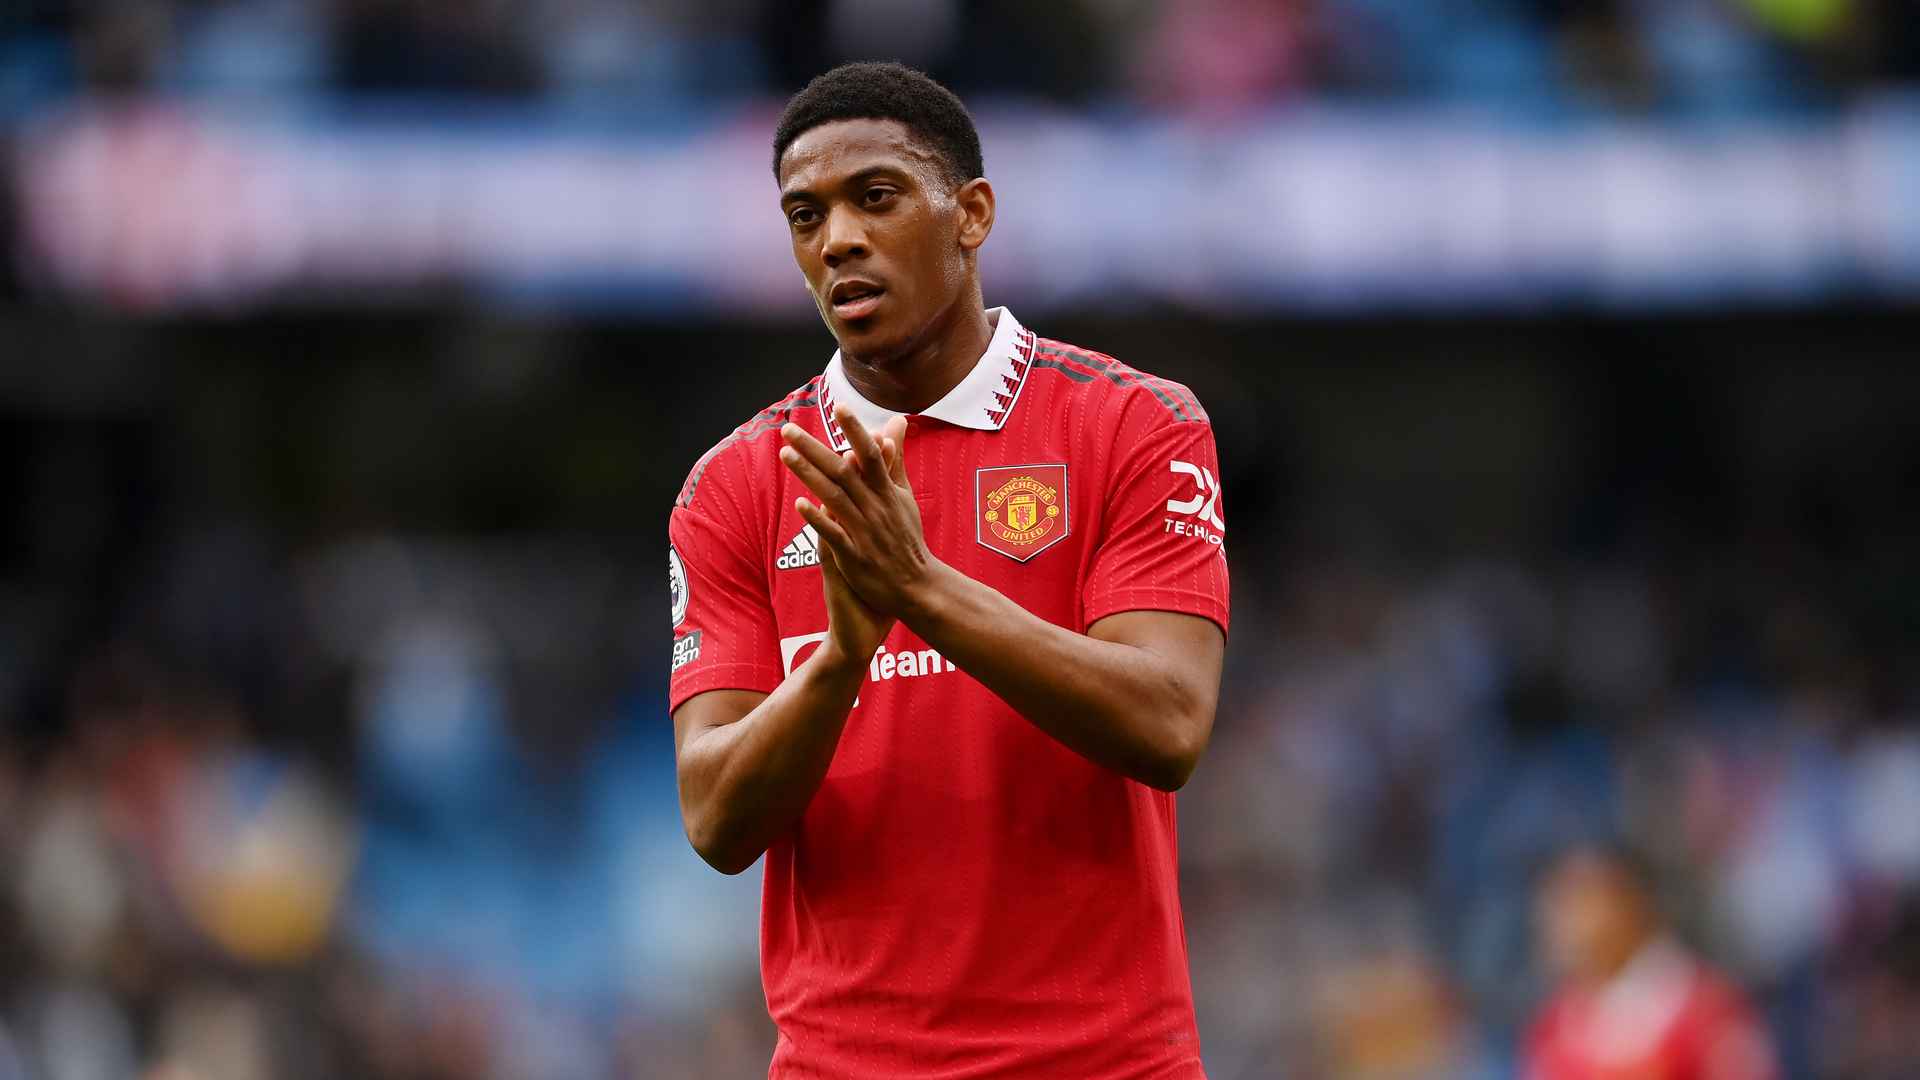 Atlético aspires to Martial after revolution at Manchester United
